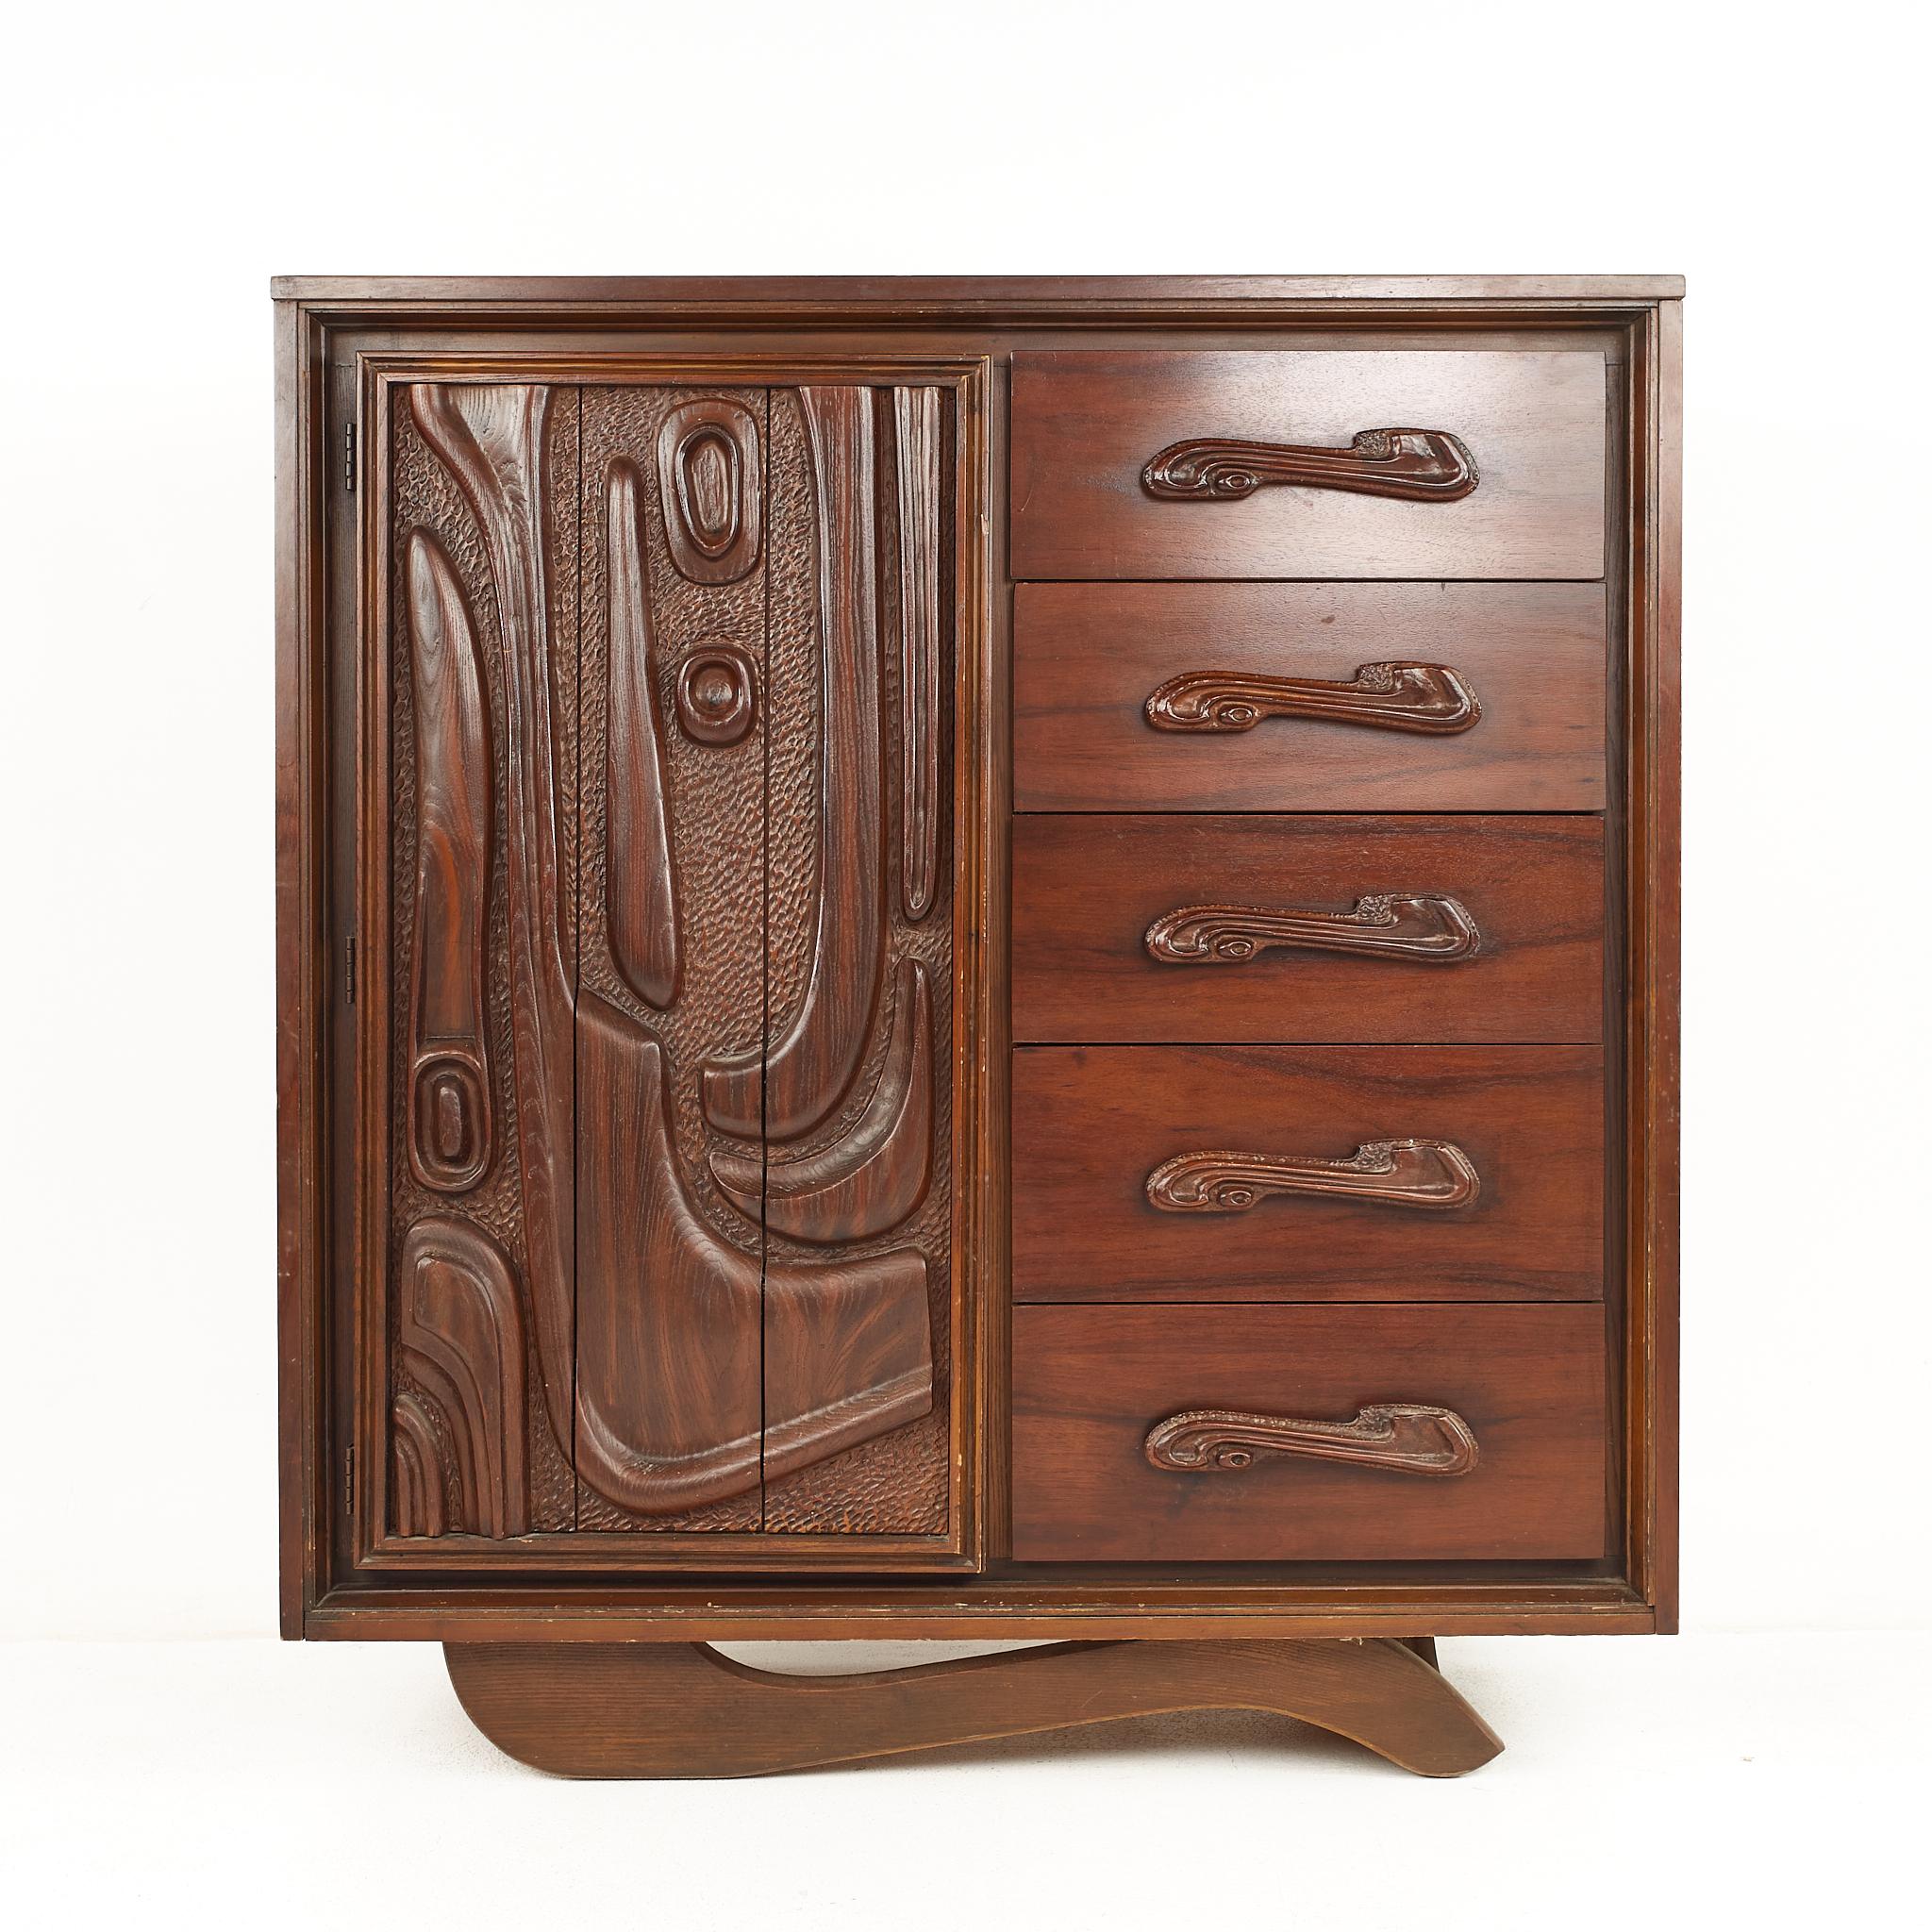 Witco Pulaski oceanic mid-century highboy brutalist armoire

The armoire measures: 48.5 wide x 19 deep x 52.5 inches

All pieces of furniture can be had in what we call restored vintage condition. That means the piece is restored upon purchase